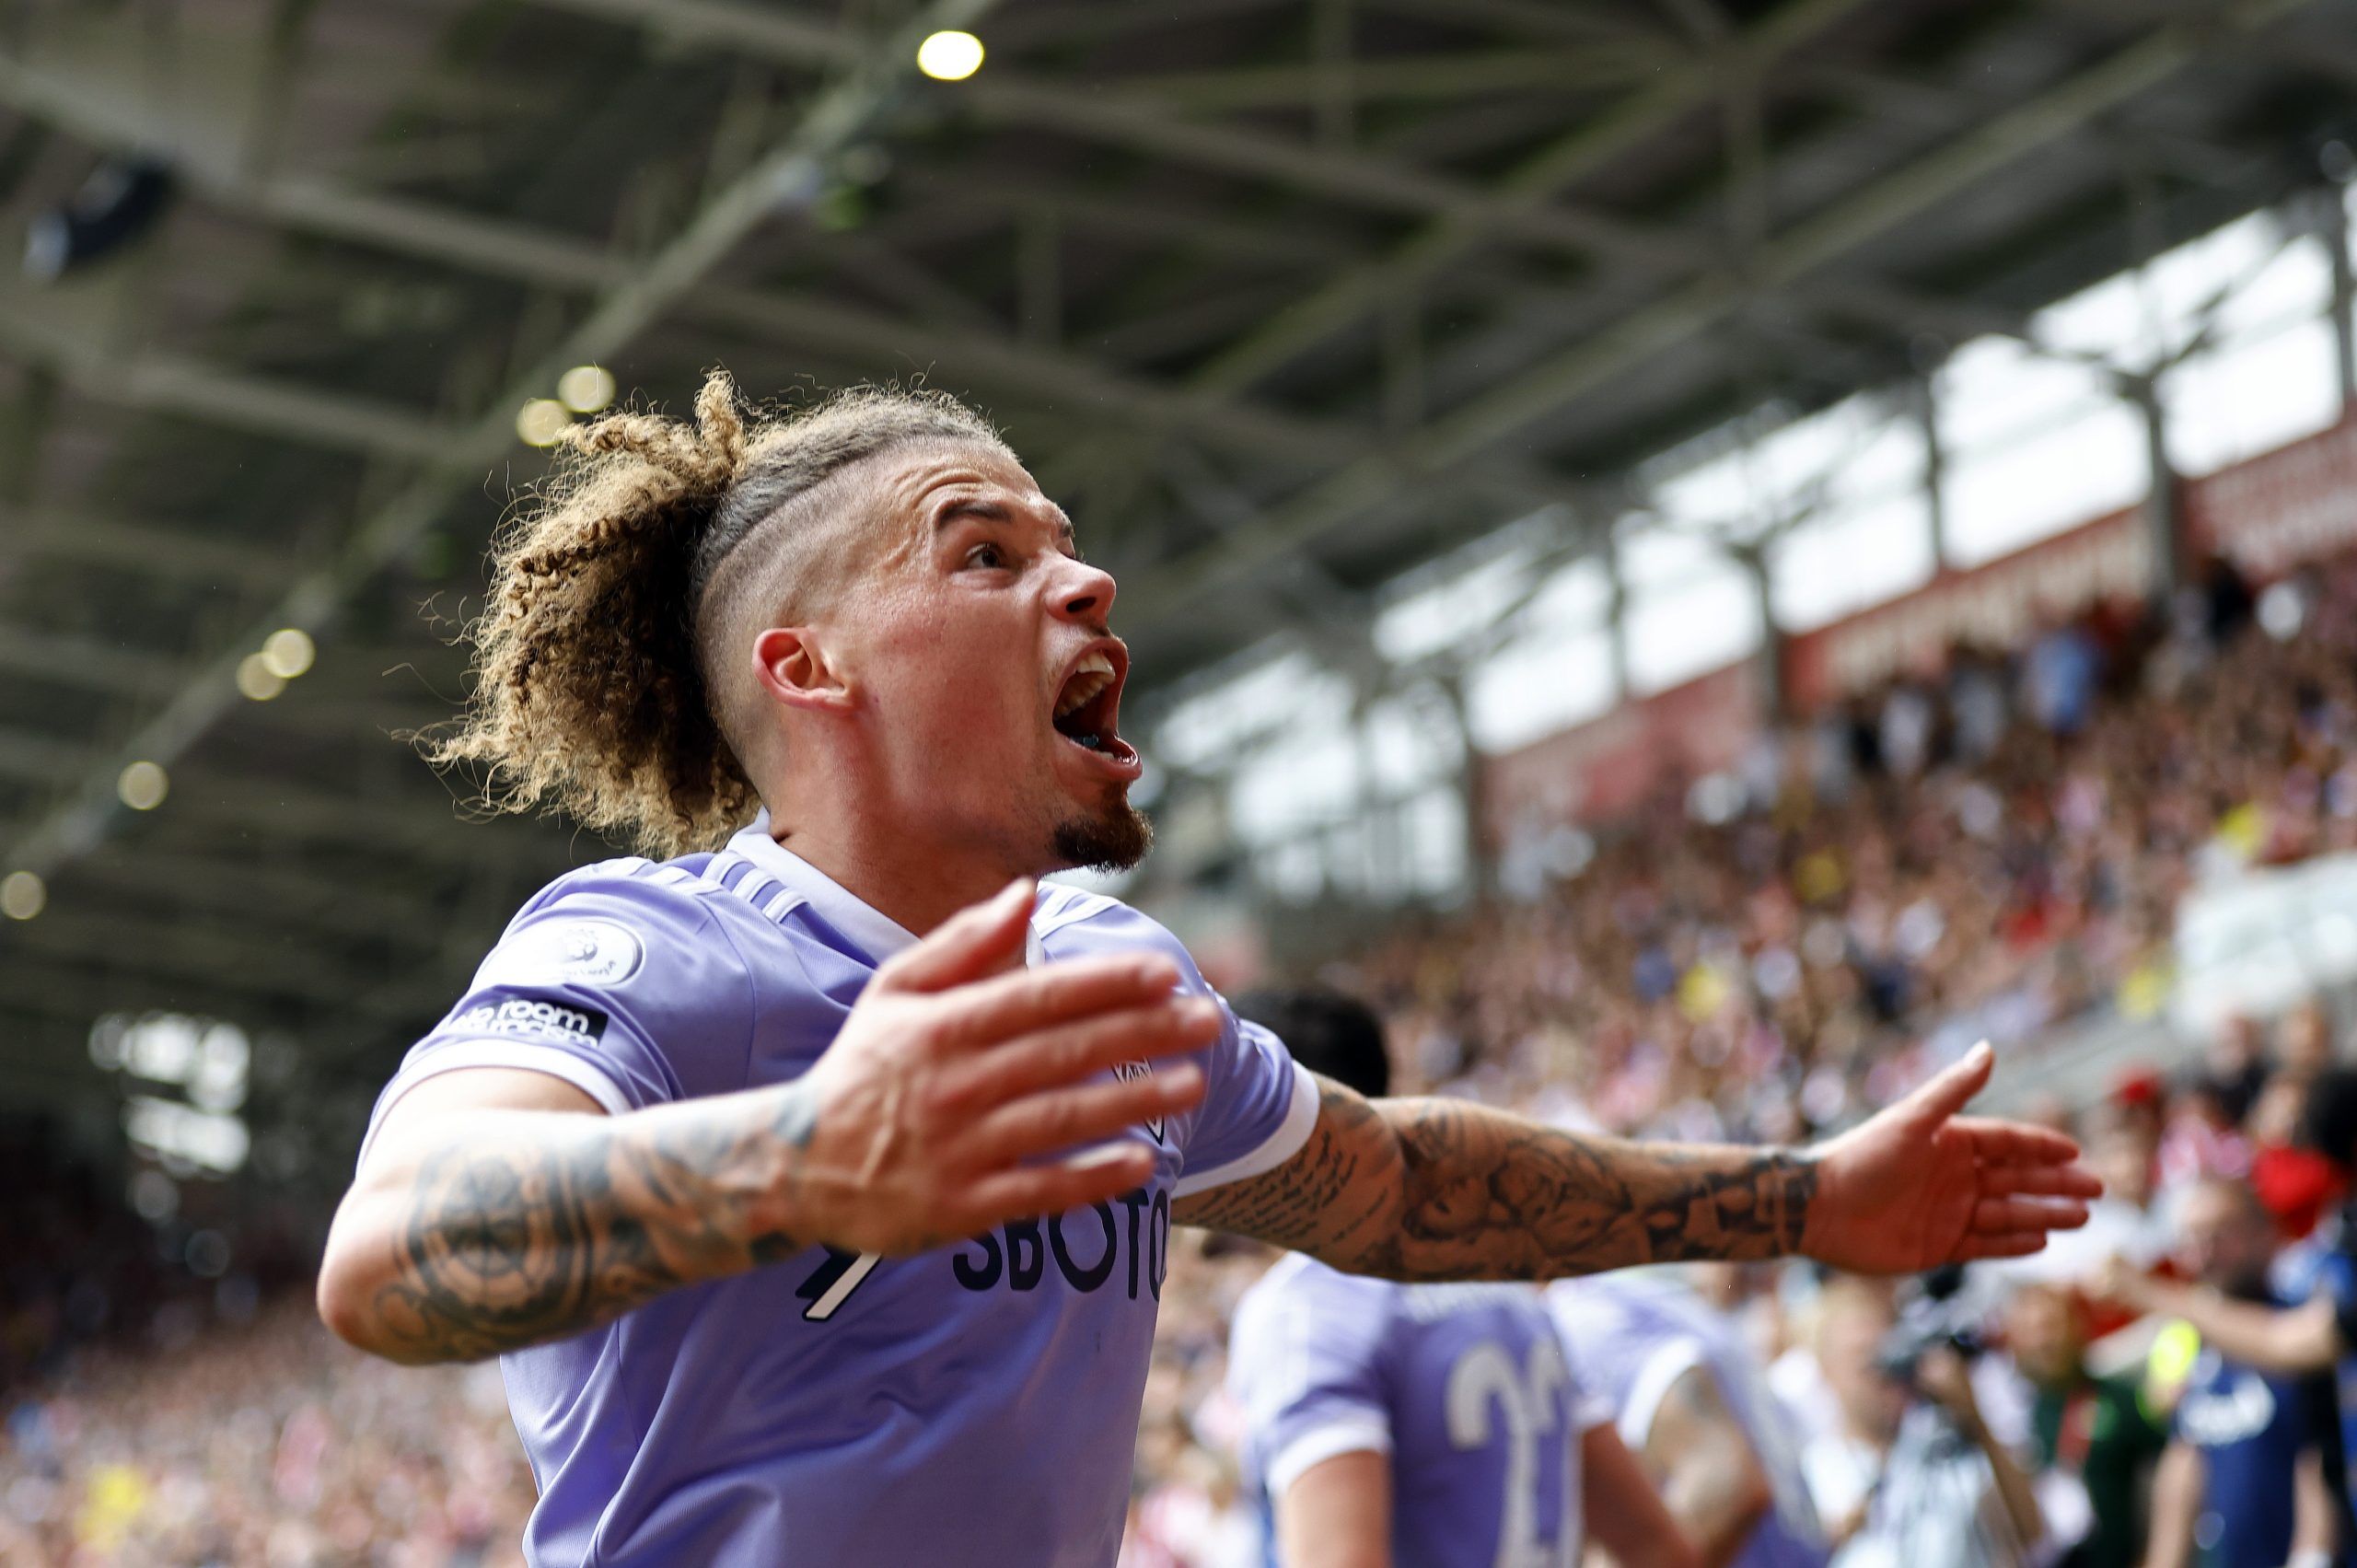 kalvin-phillips-leeds-united-premier-league-aston-villa-transfer-news-steven-gerrard-manchester-city-pep-guardiola-latestSoccer Football - Premier League - Brentford v Leeds United - Brentford Community Stadium, London, Britain - May 22, 2022 Leeds United's Kalvin Phillips celebrates after teammate Raphinha scores their first goal Action Images via Reuters/Andrew Boyers EDITORIAL USE ONLY. No use with unauthorized audio, video, data, fixture lists, club/league logos or 'live' services. Online in